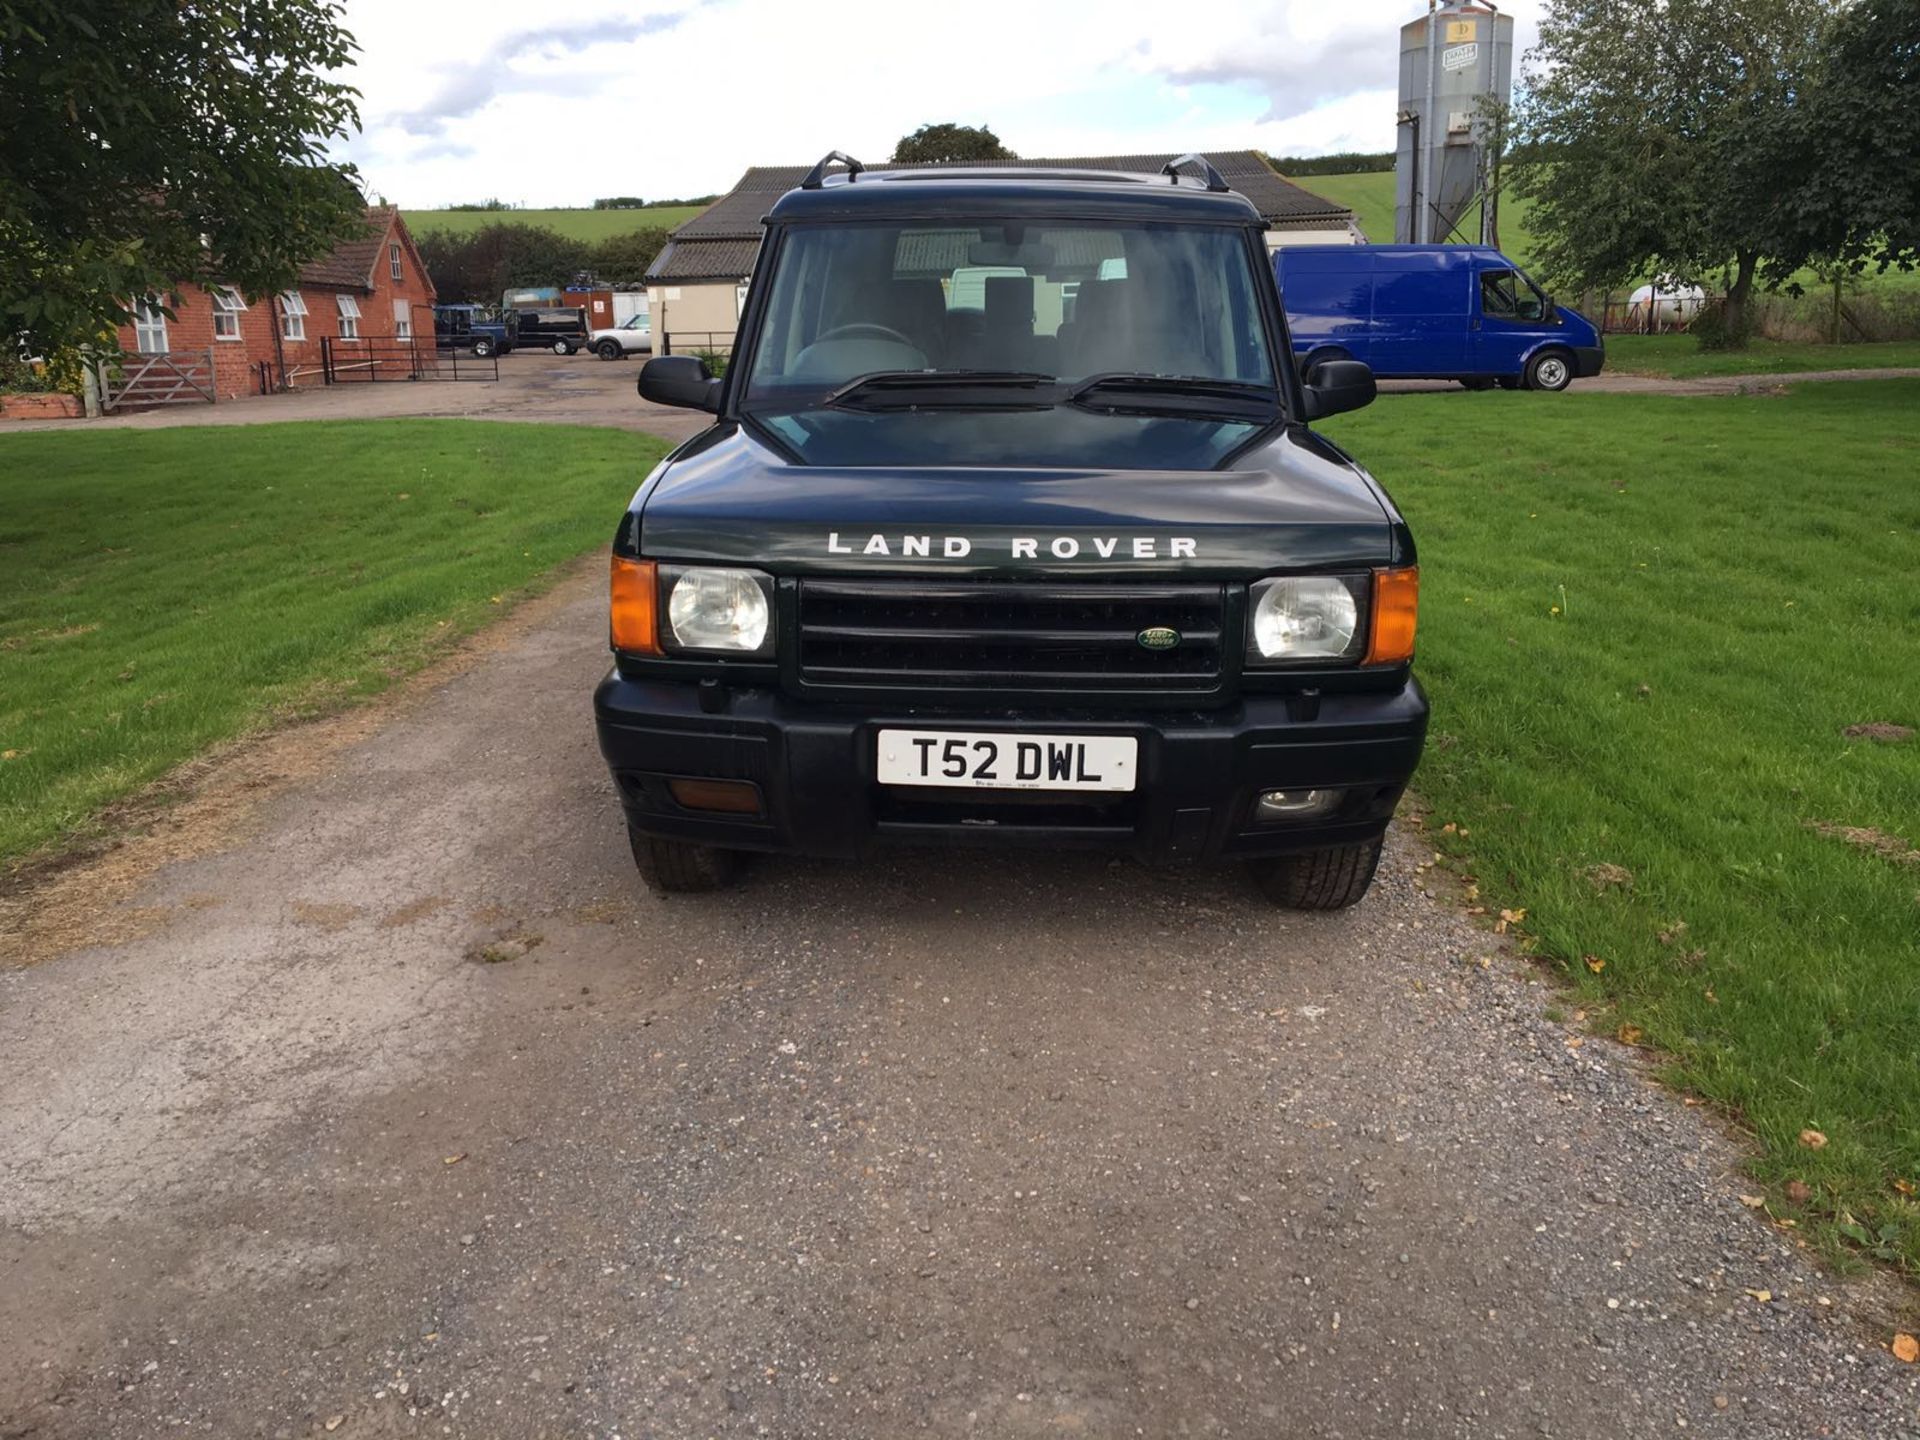 1999 REG LAND ROVER DISCOVERY GREEN, NEW ENGINE FITTED NOT LONG AGO AND COMES WITH NEW MOT *NO VAT* - Image 2 of 10